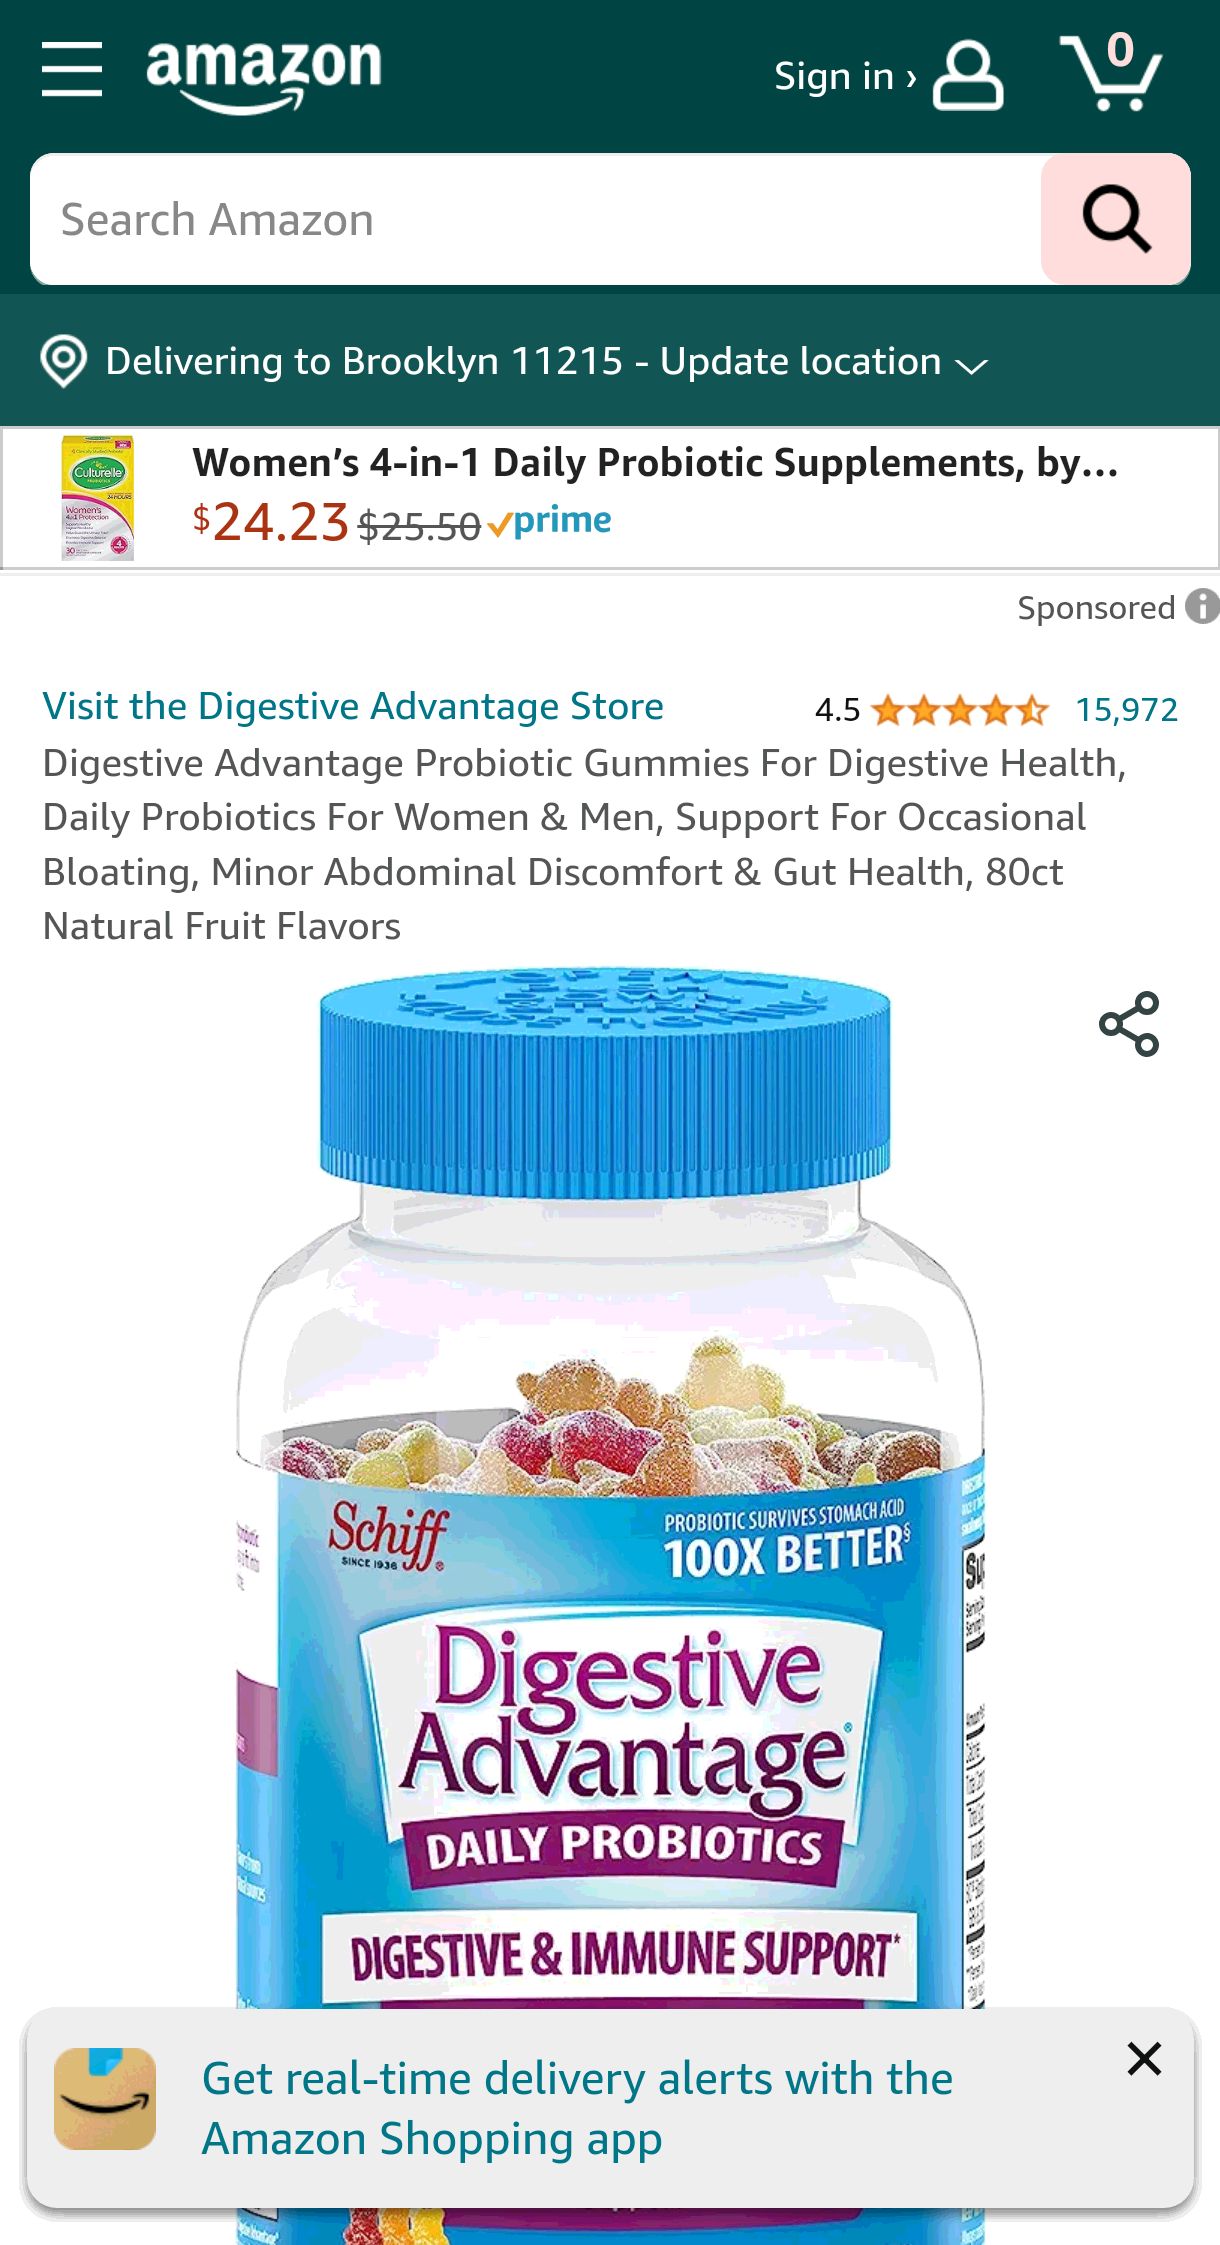 Digestive Advantage Probiotic Gummies For Digestive Health, Daily Probiotics For Women & Men, Support For Occasional Bloating, Minor Abdominal Discomfort & Gut Health, 80ct Natural Fruit Flavors : Hea